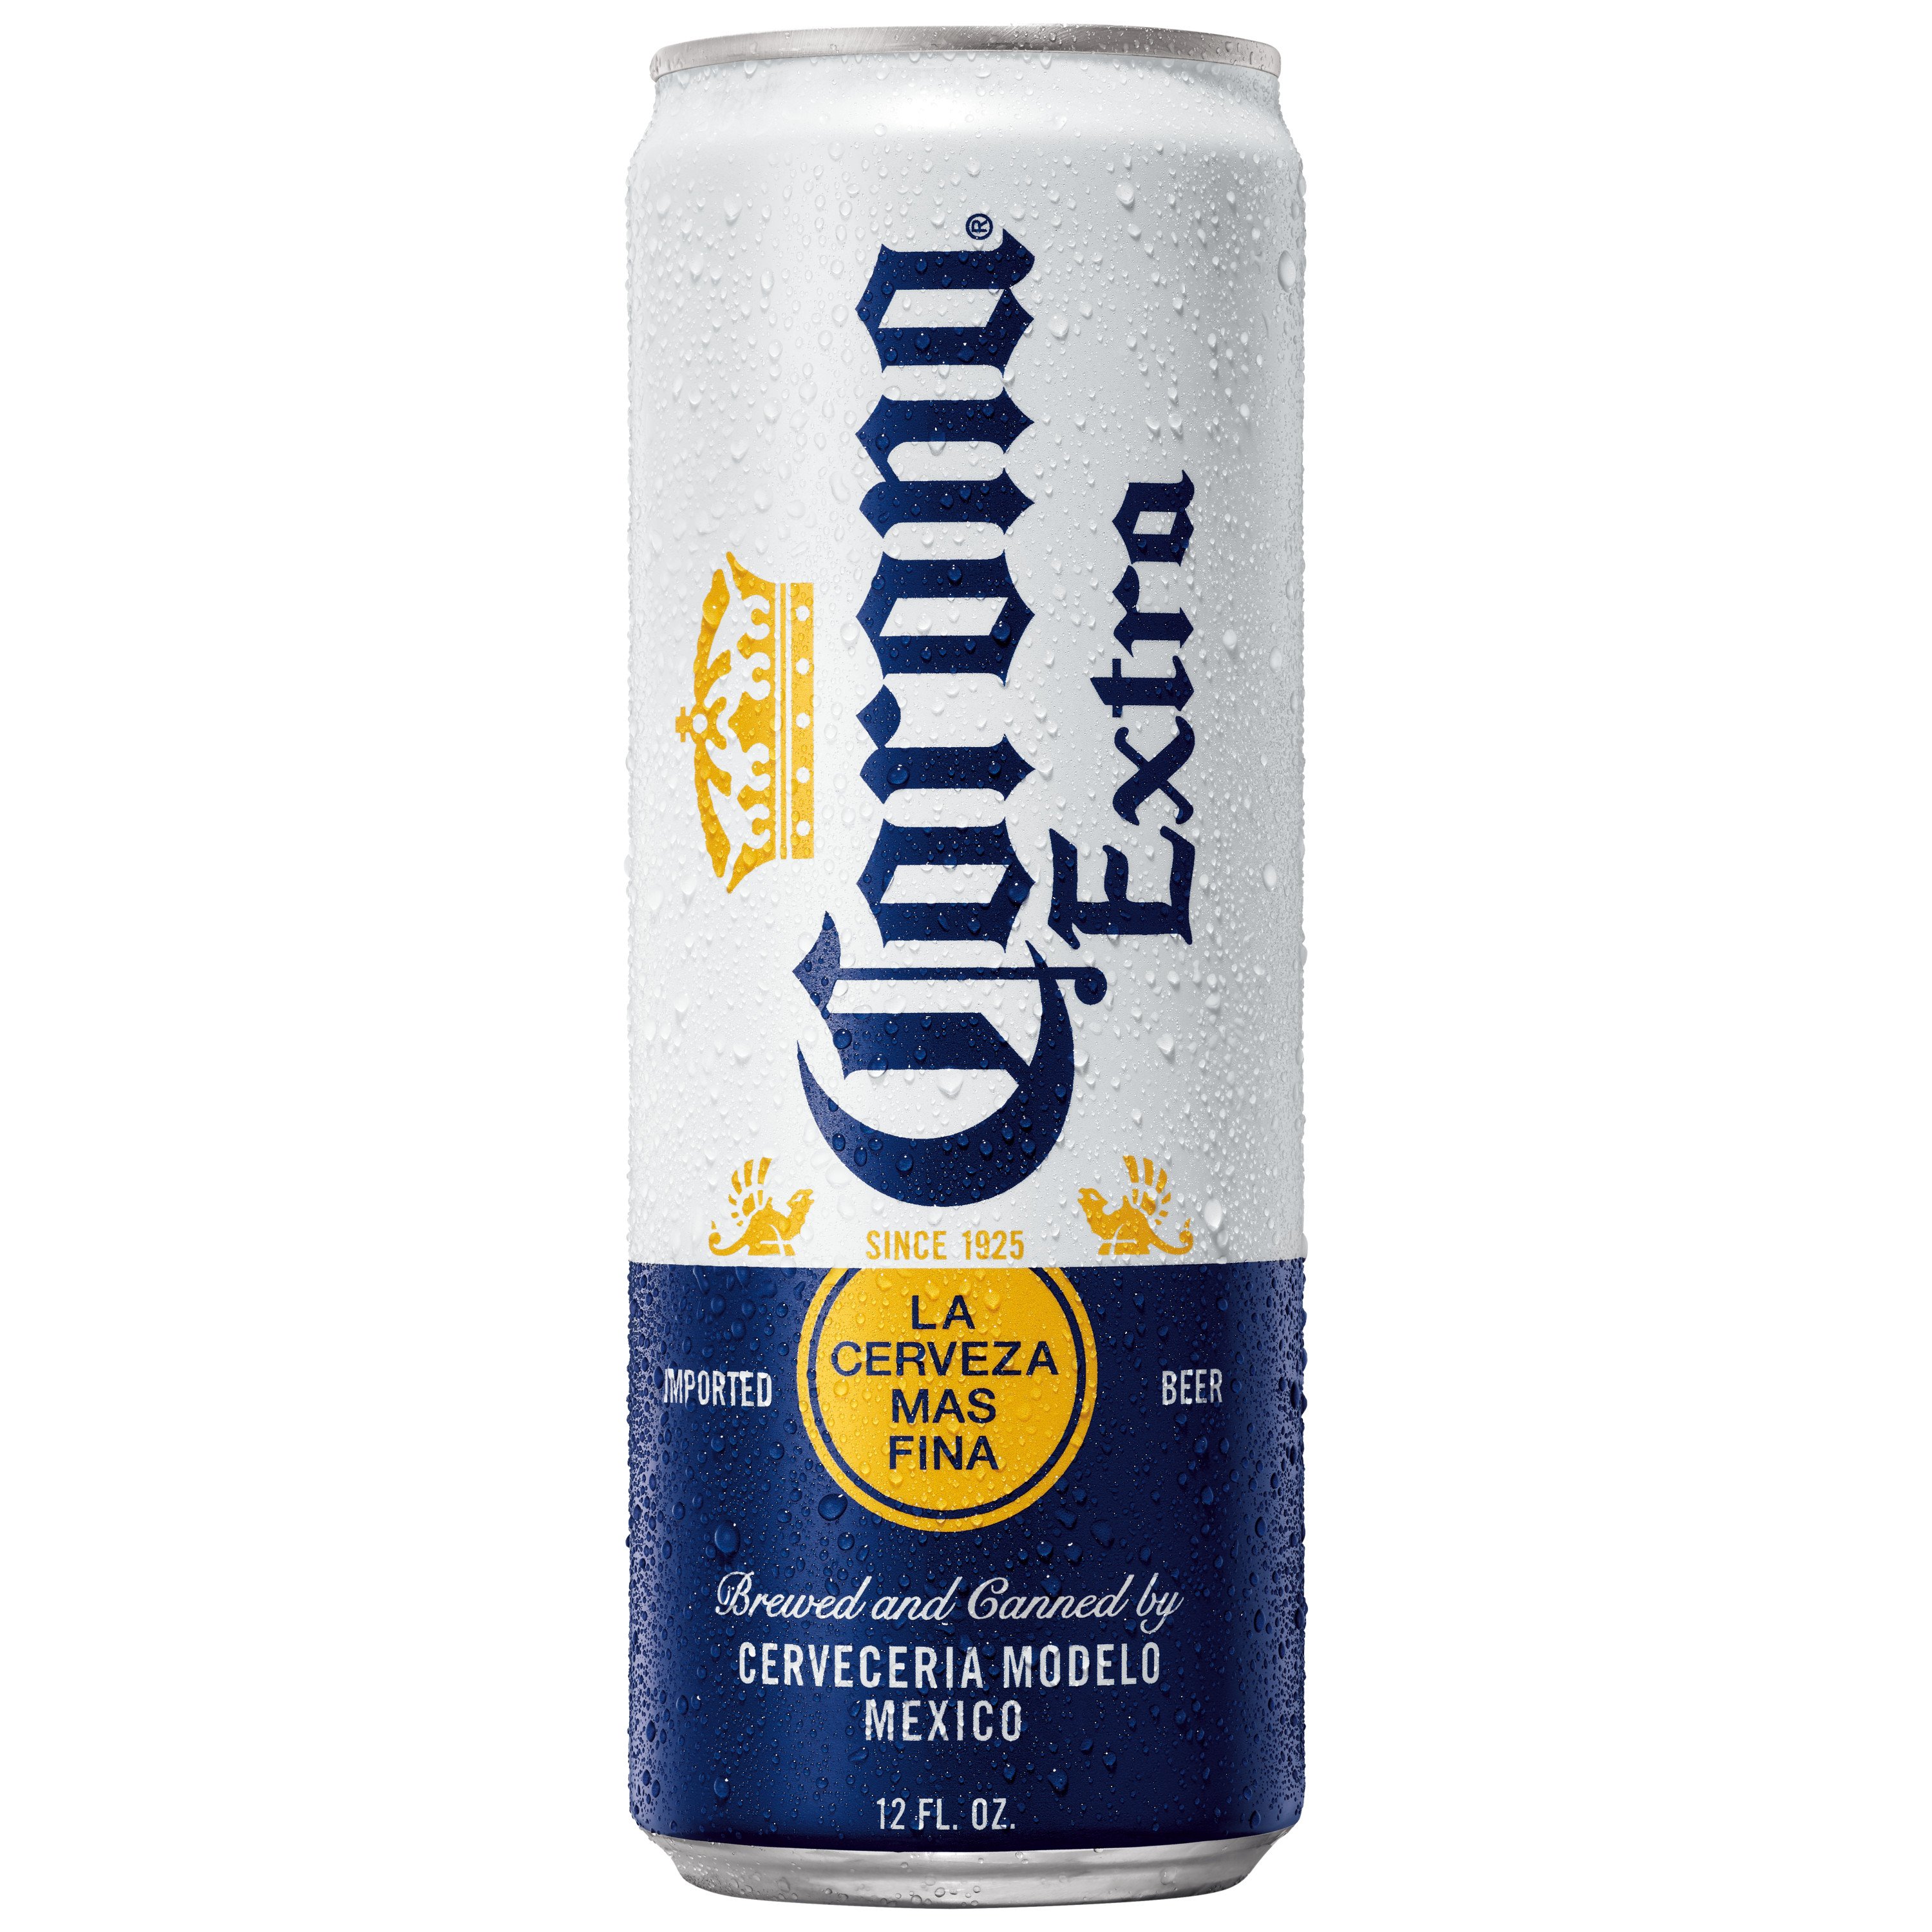 Corona Extra Lager Mexican Beer 6 pk Cans - Shop Beer at H-E-B